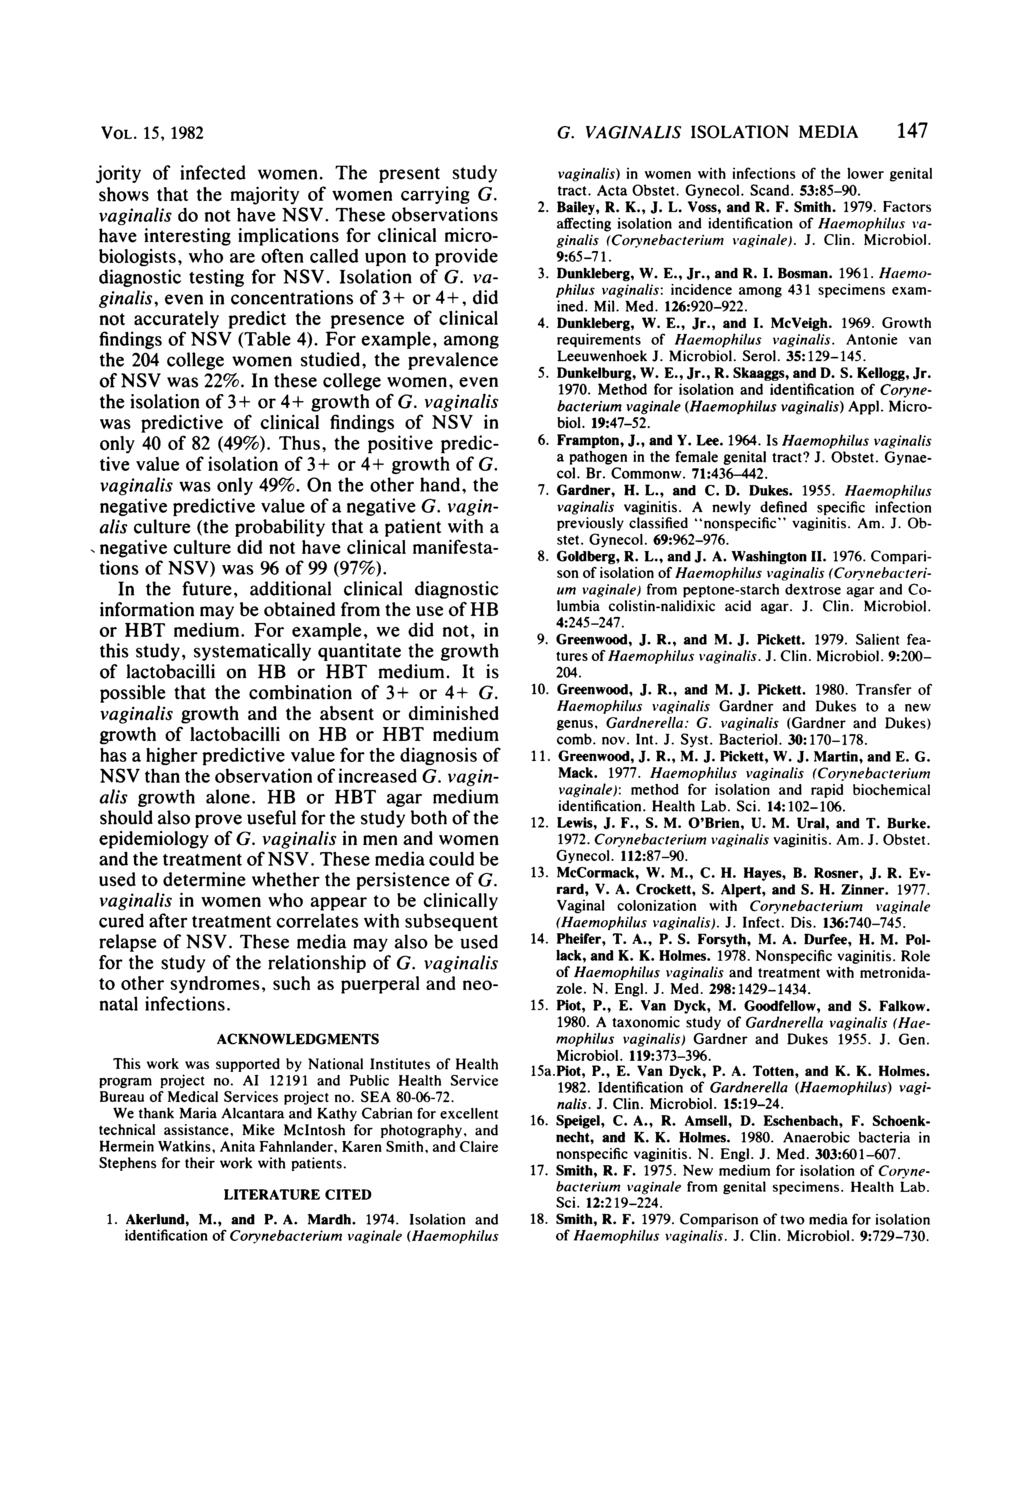 VOL. 15, 1982 jority of infected women. The present study shows that the majority of women carrying G. vaginalis do not have NSV.